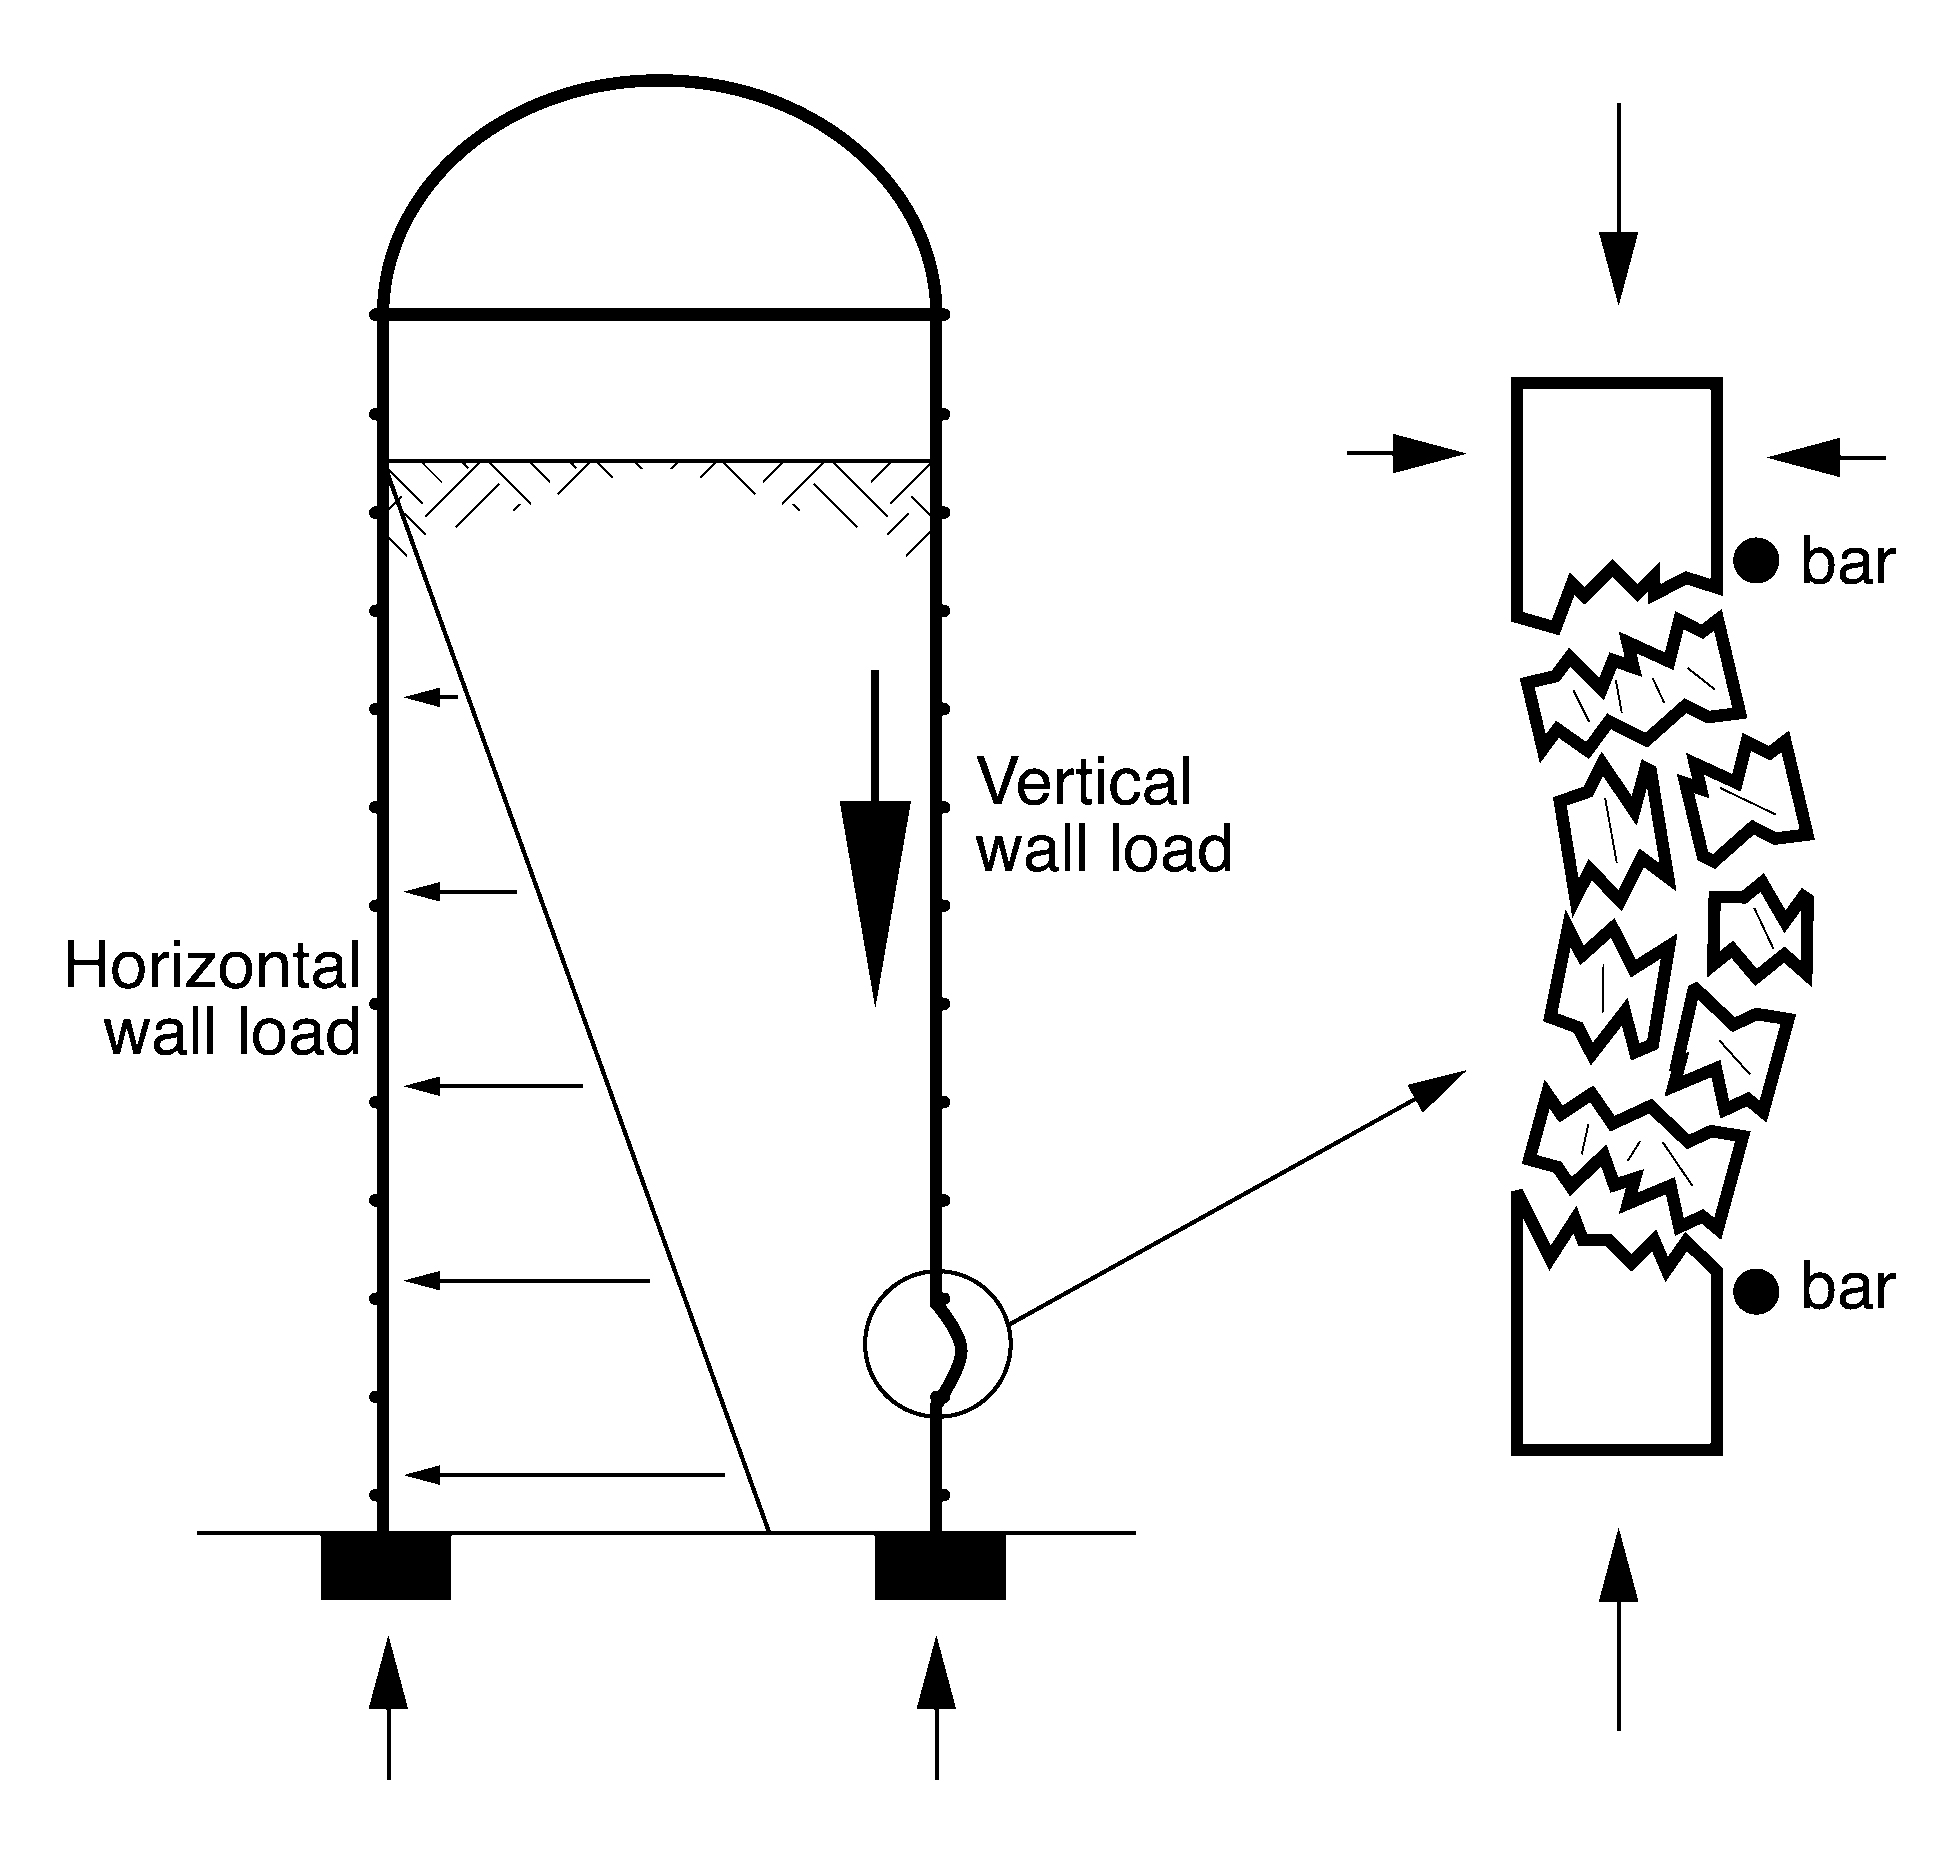 Demonstration of how the concrete wall of a silo can be weakened by silage acids; after years of use, the wall could be weakened so much that collapse can occur